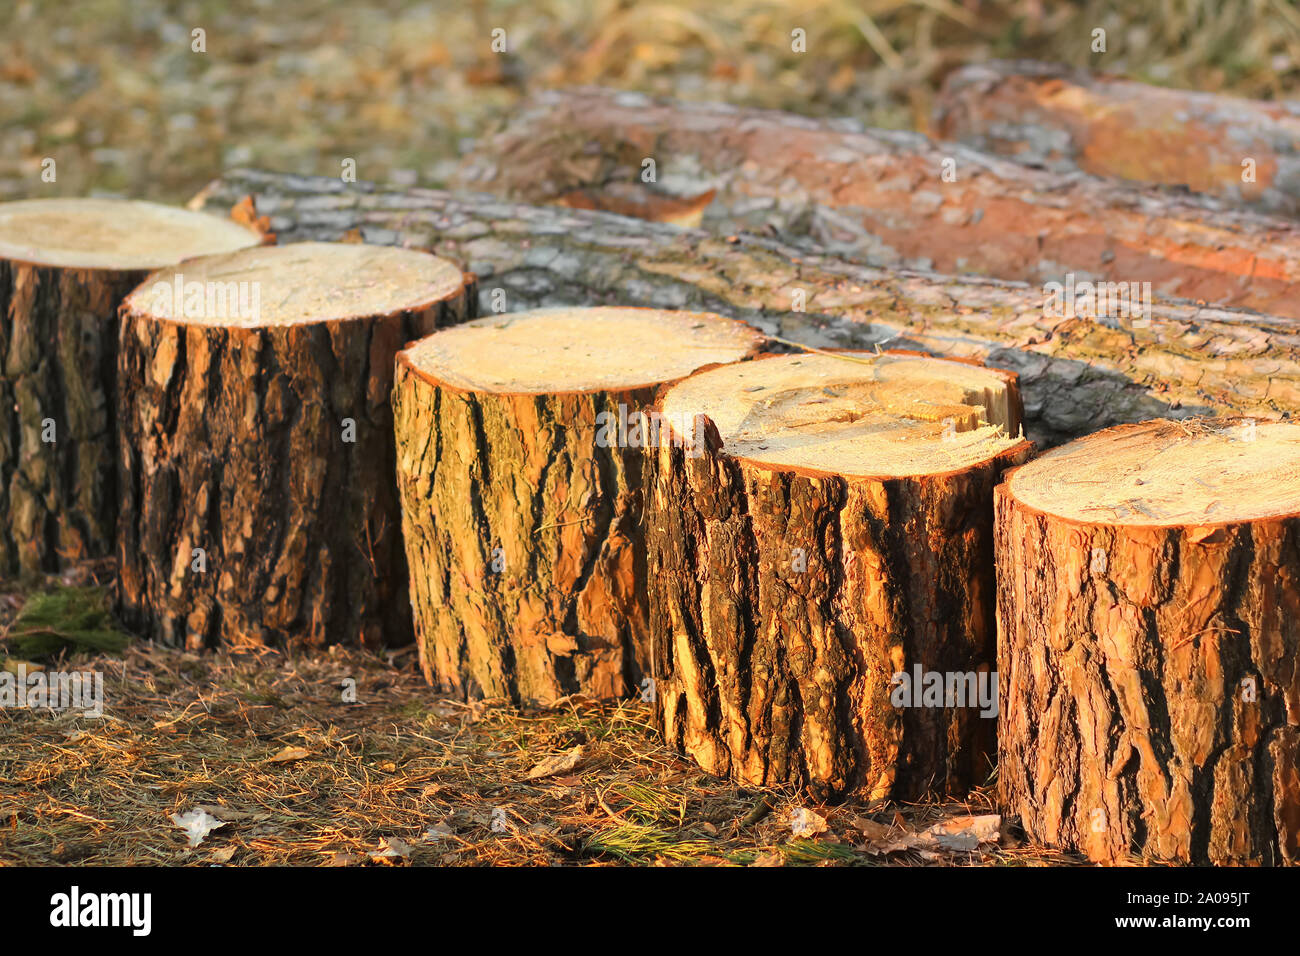 Row of stumps after a freshly cut pine tree, forestry, deforestation problem Stock Photo